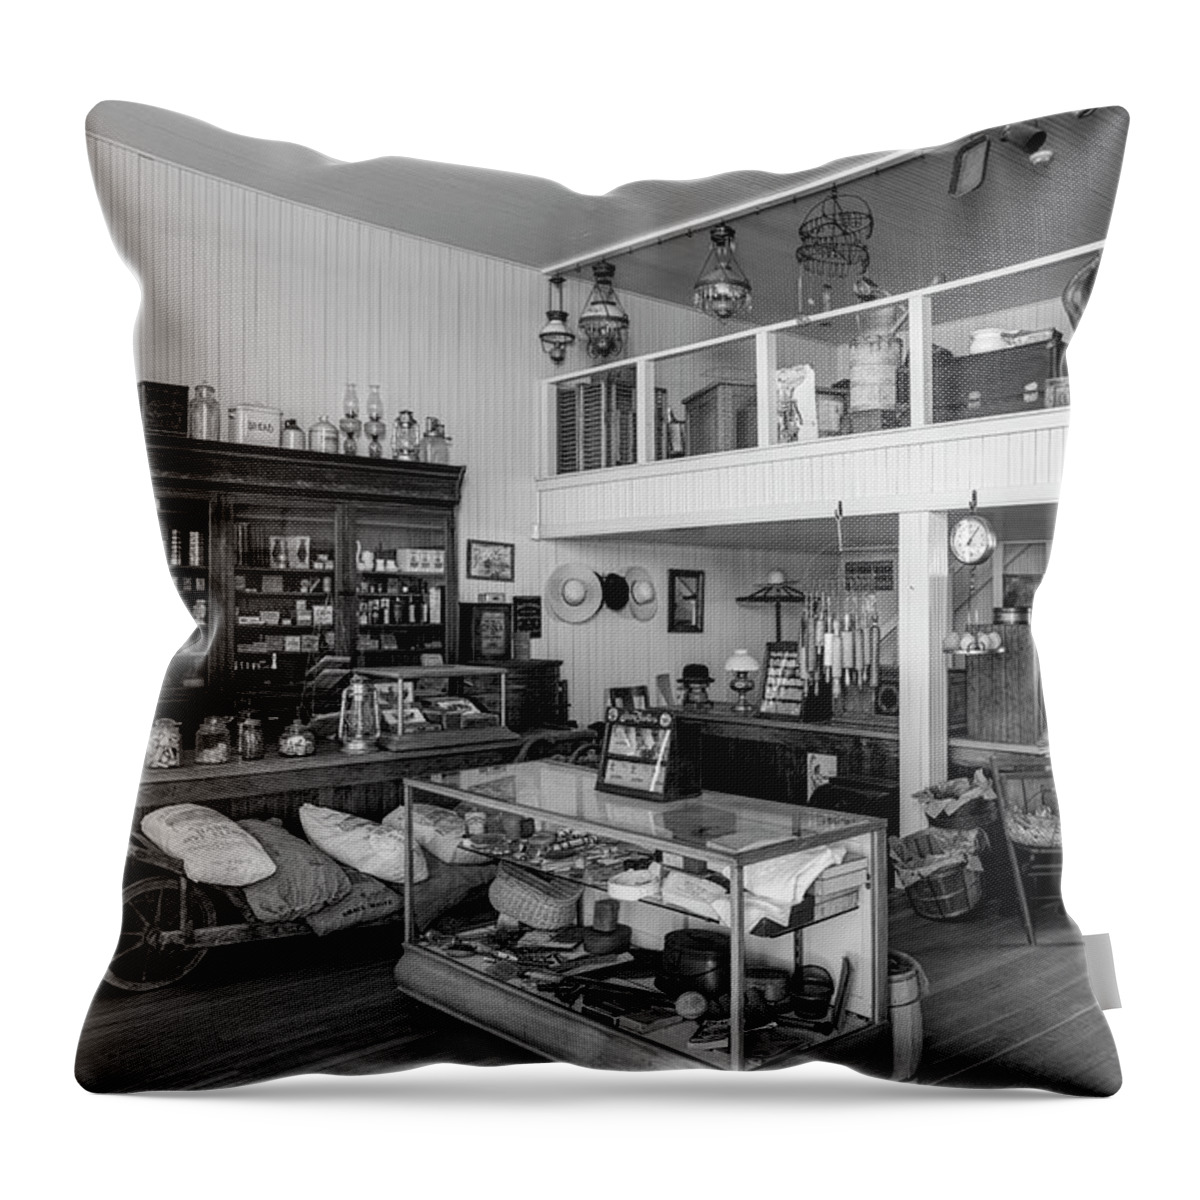 Allensworth Park Throw Pillow featuring the photograph Hindsman General Store - Allensworth State Park - Black And White by Gene Parks